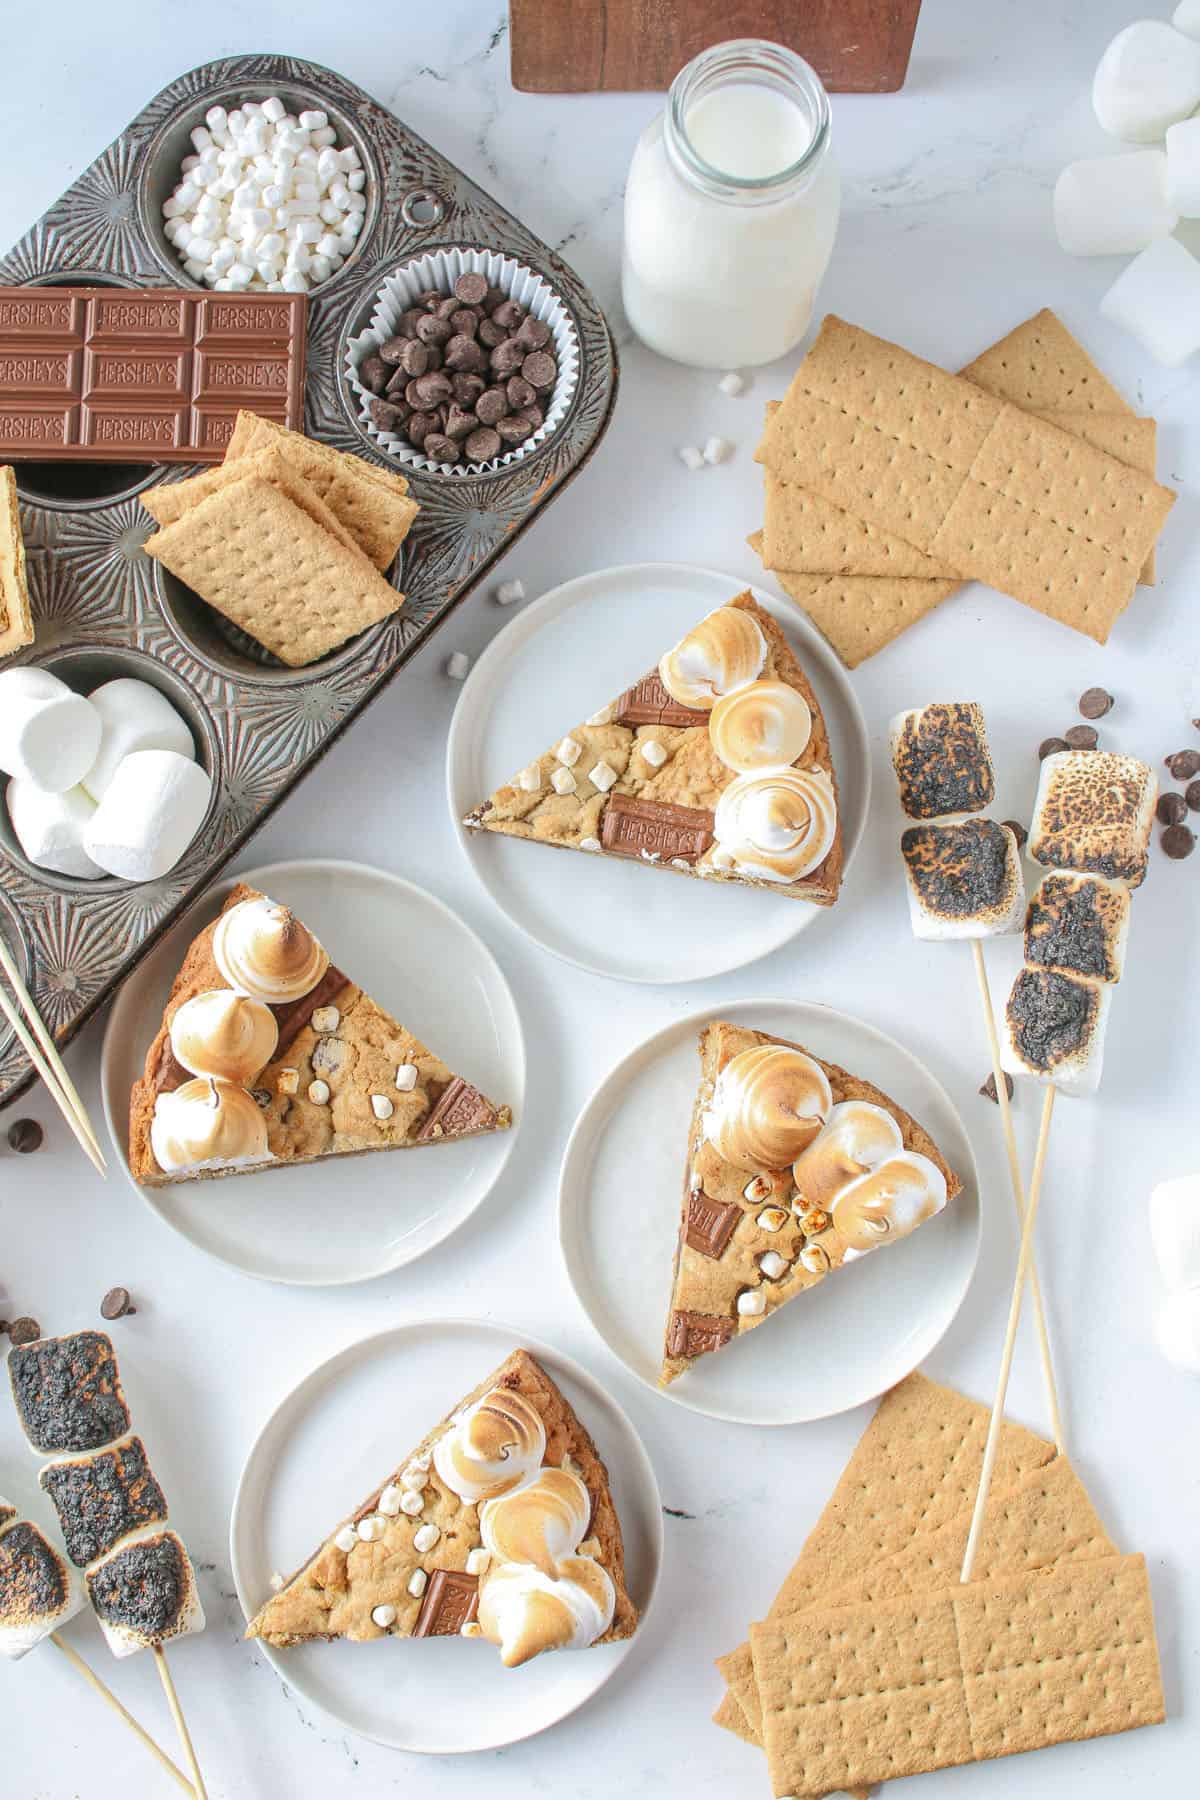 Sliced S'mores Cookie Cake on small white plates on a white marble background with s'mores ingredients in surrounding the ingredients- sheets of graham crackers, chocolate chips, toasted marshmallows on sticks.